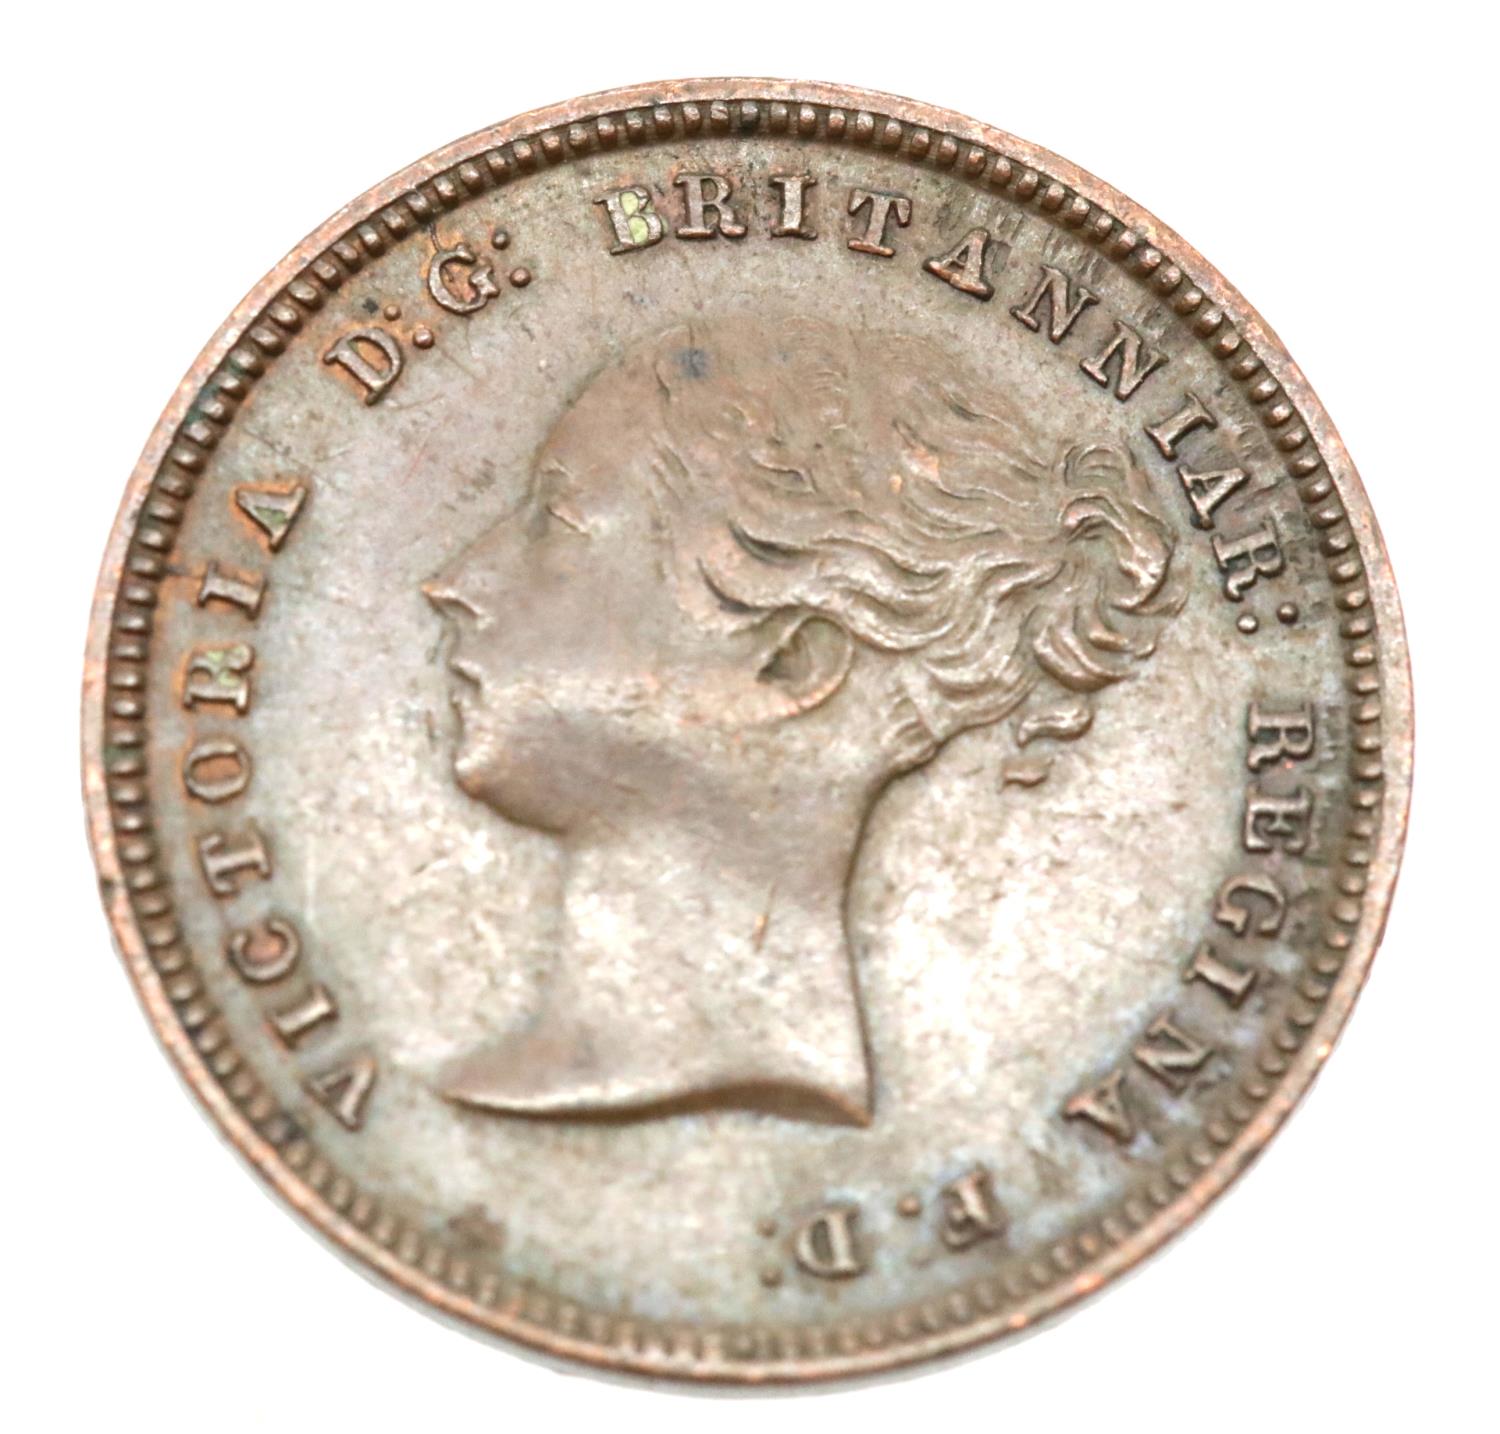 1844 - Copper Half Farthing of Queen Victoria (Young Head bust). P&P Group 1 (£14+VAT for the